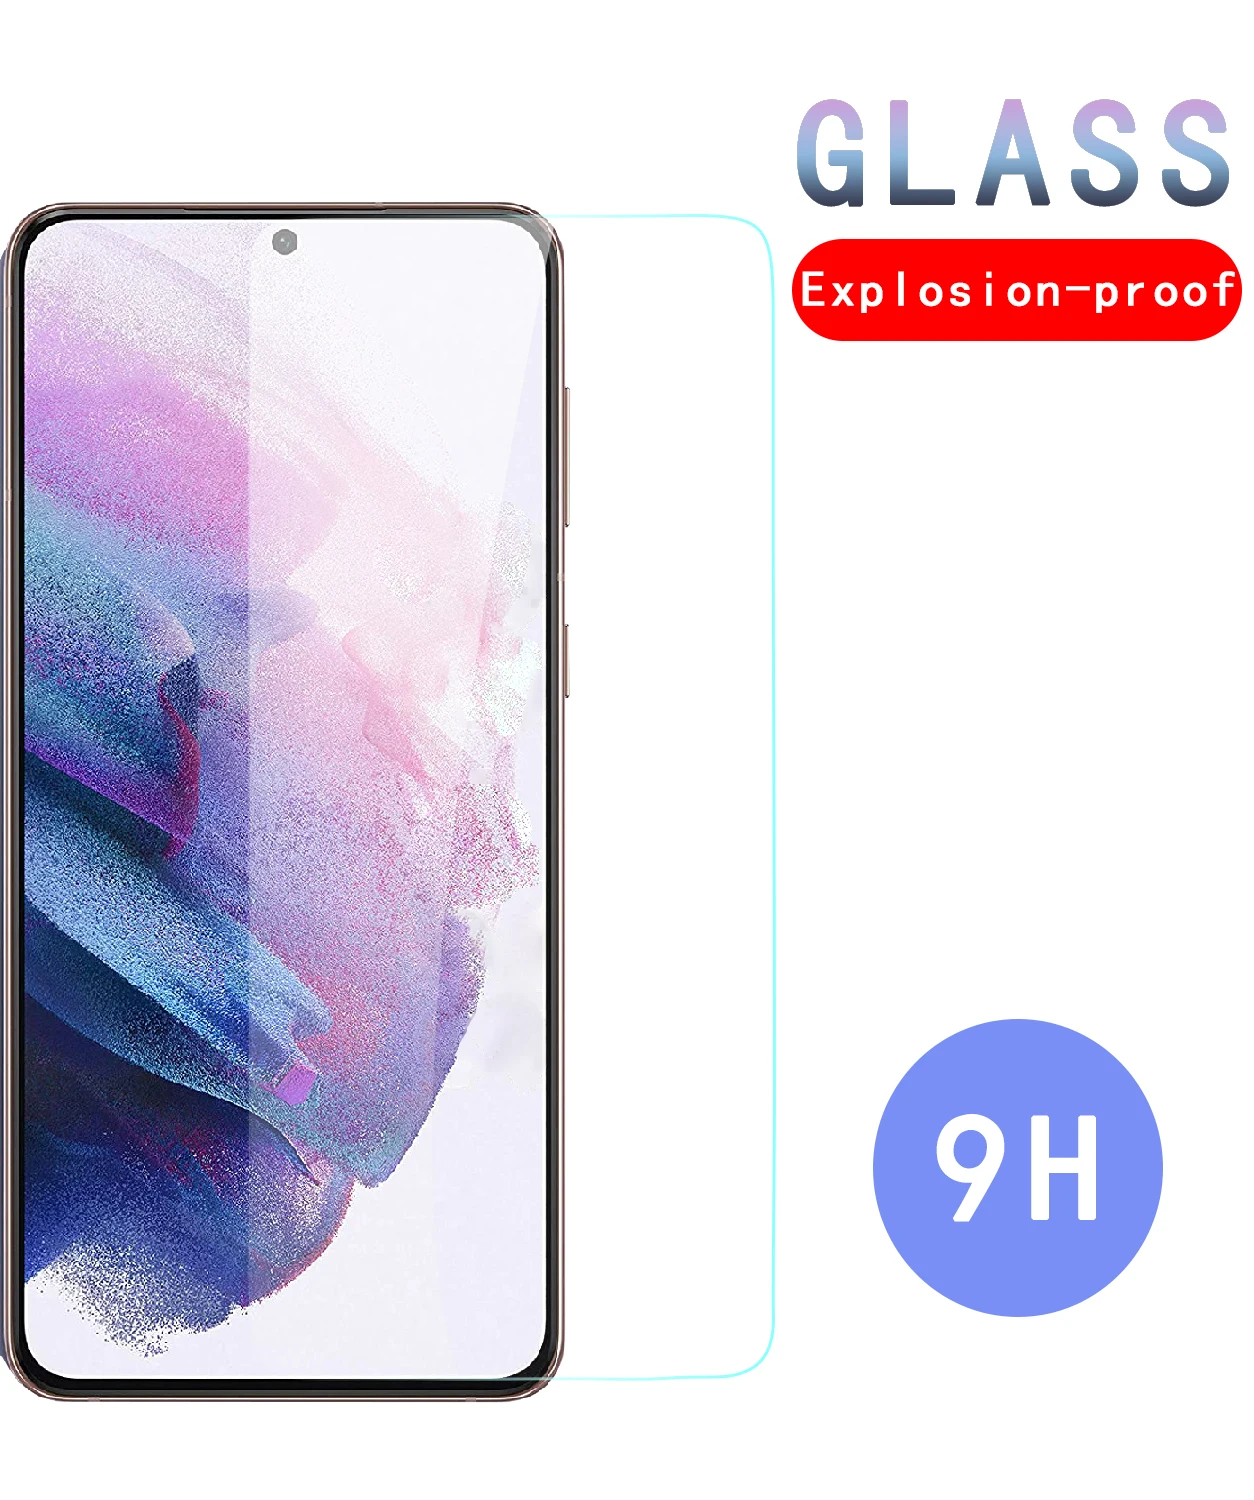 9H Protective Glass For Samsung Galaxy A71 A51 A41 A31 A21S A11 A01 Screen Protector M01 M11 M21 M31 M51 A30 A50 Safety Glass tempered glass for samsung galaxy a01 a11 a21 a31 a41 a51 a71 screen protector glass a21s m11 m21 m31 a30 a50 protective glass